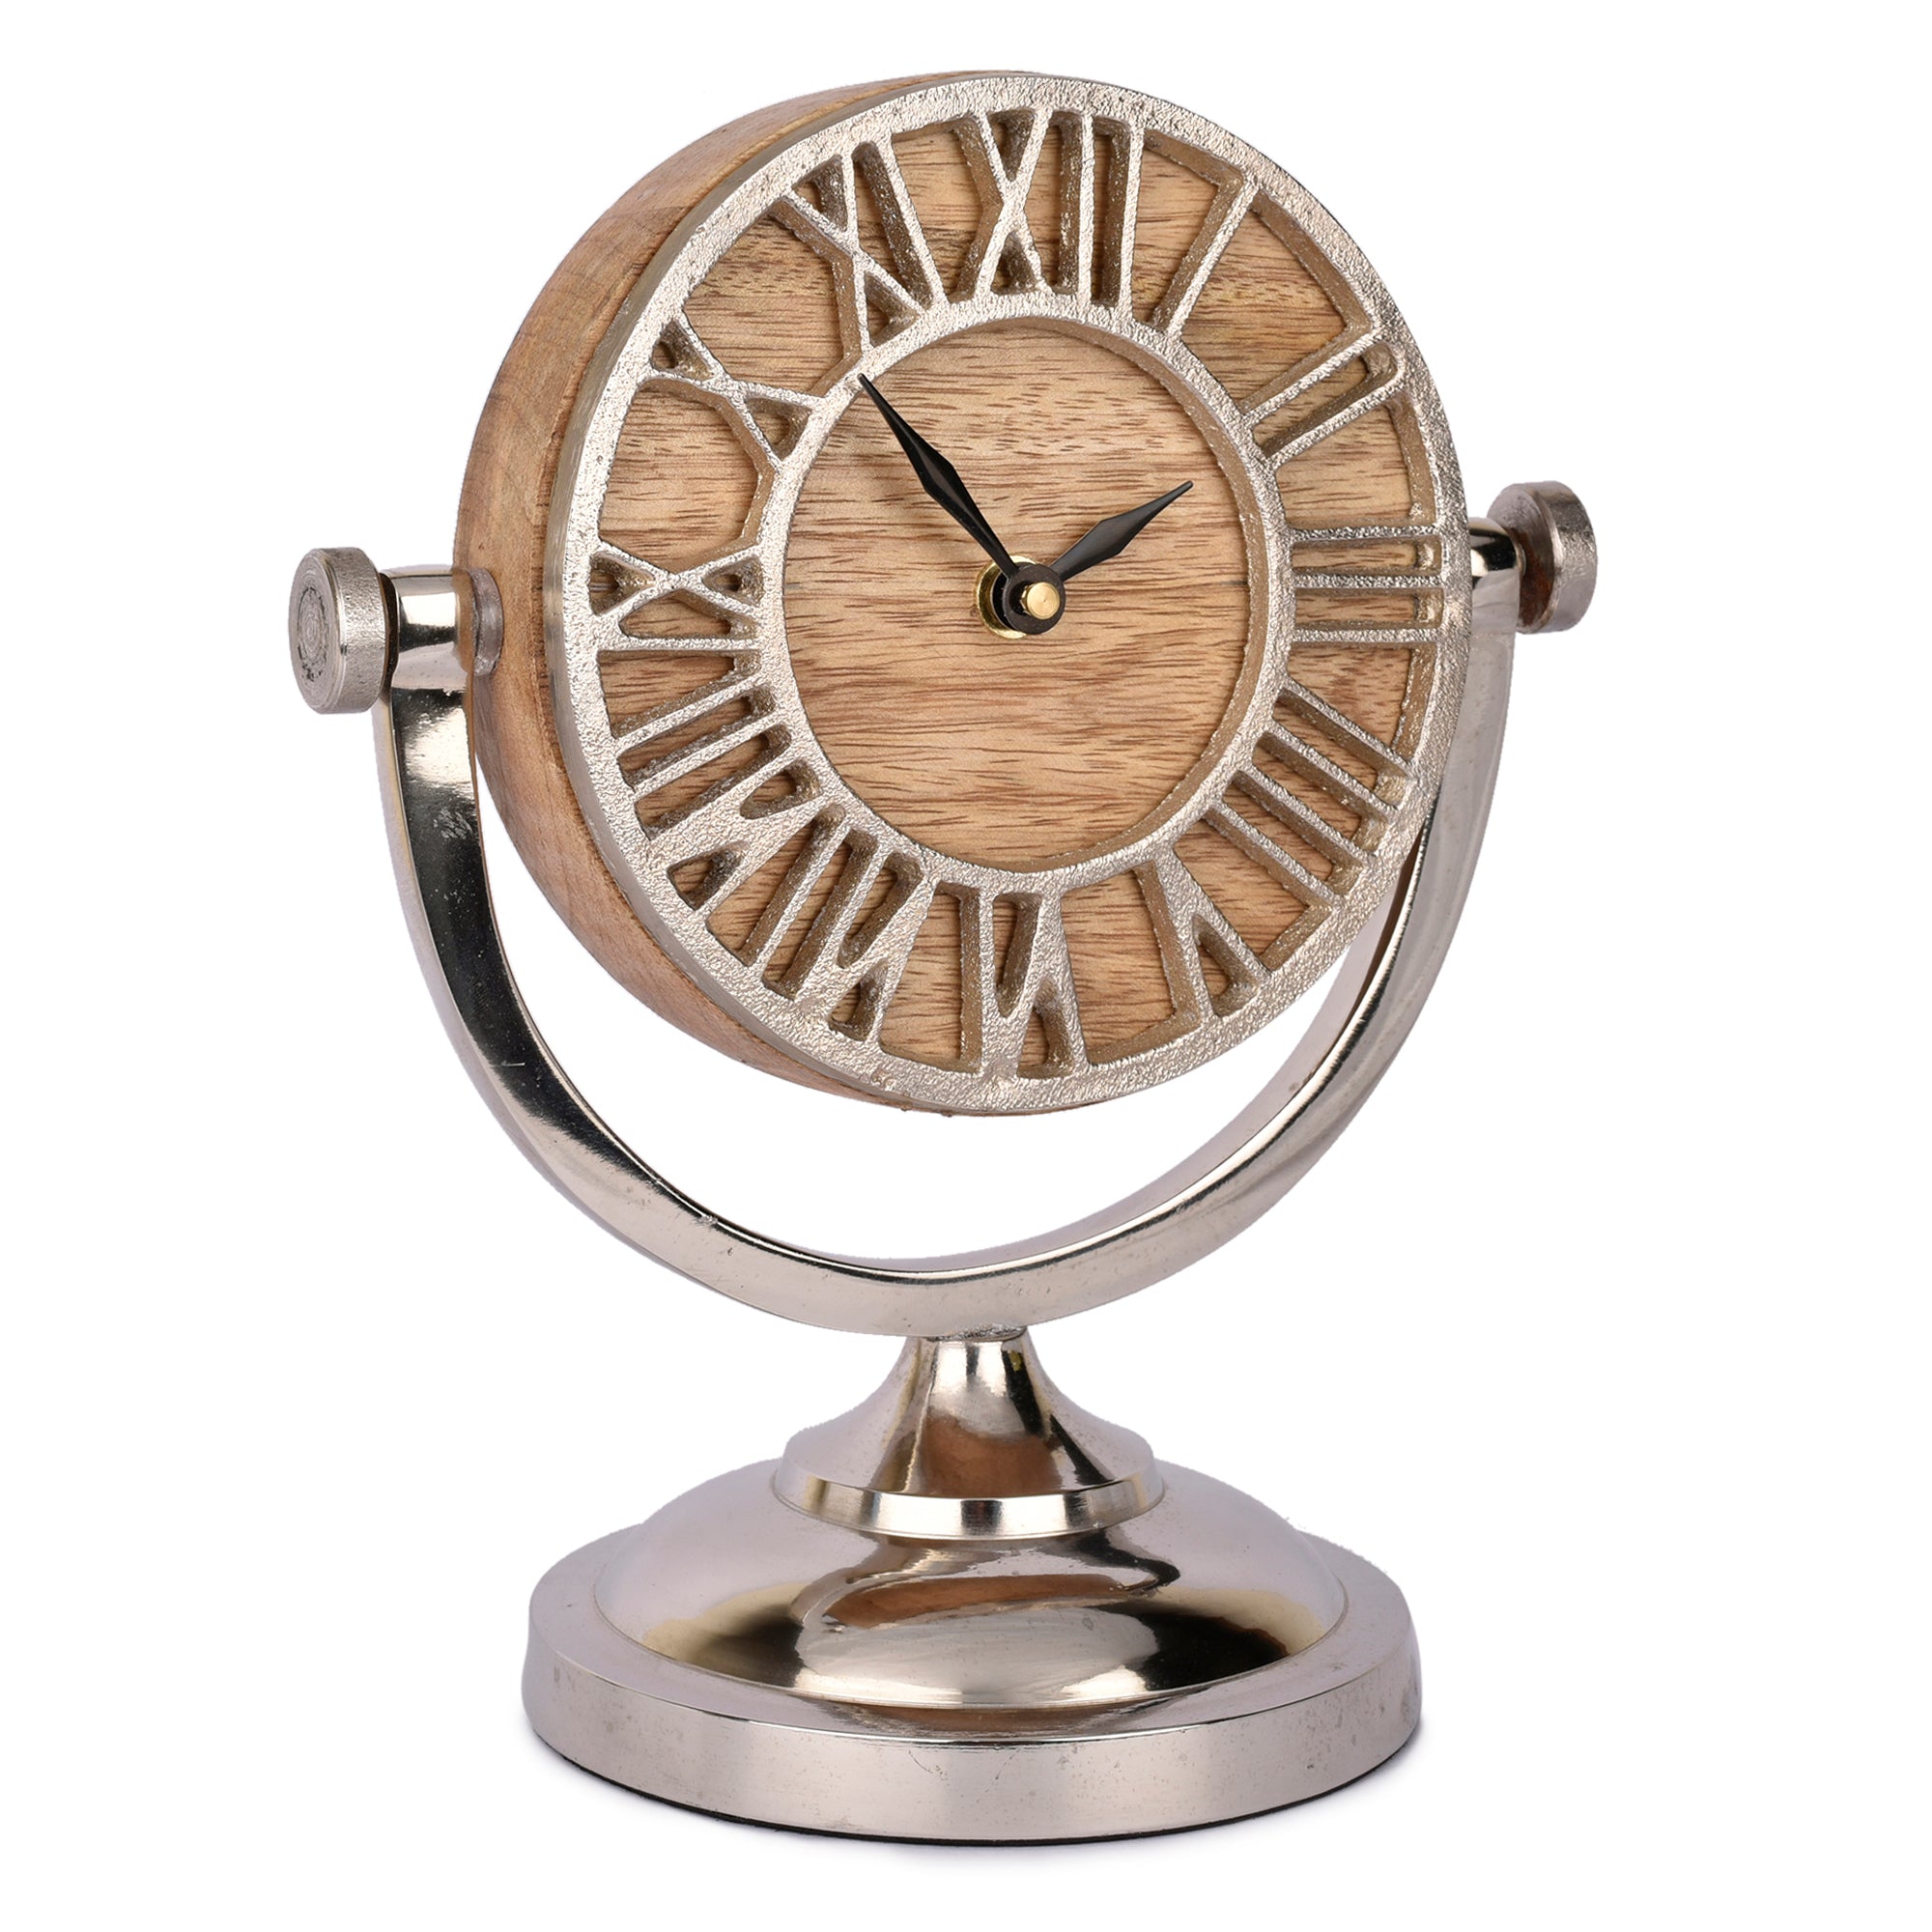 Gina Table Clock 9.5 inches